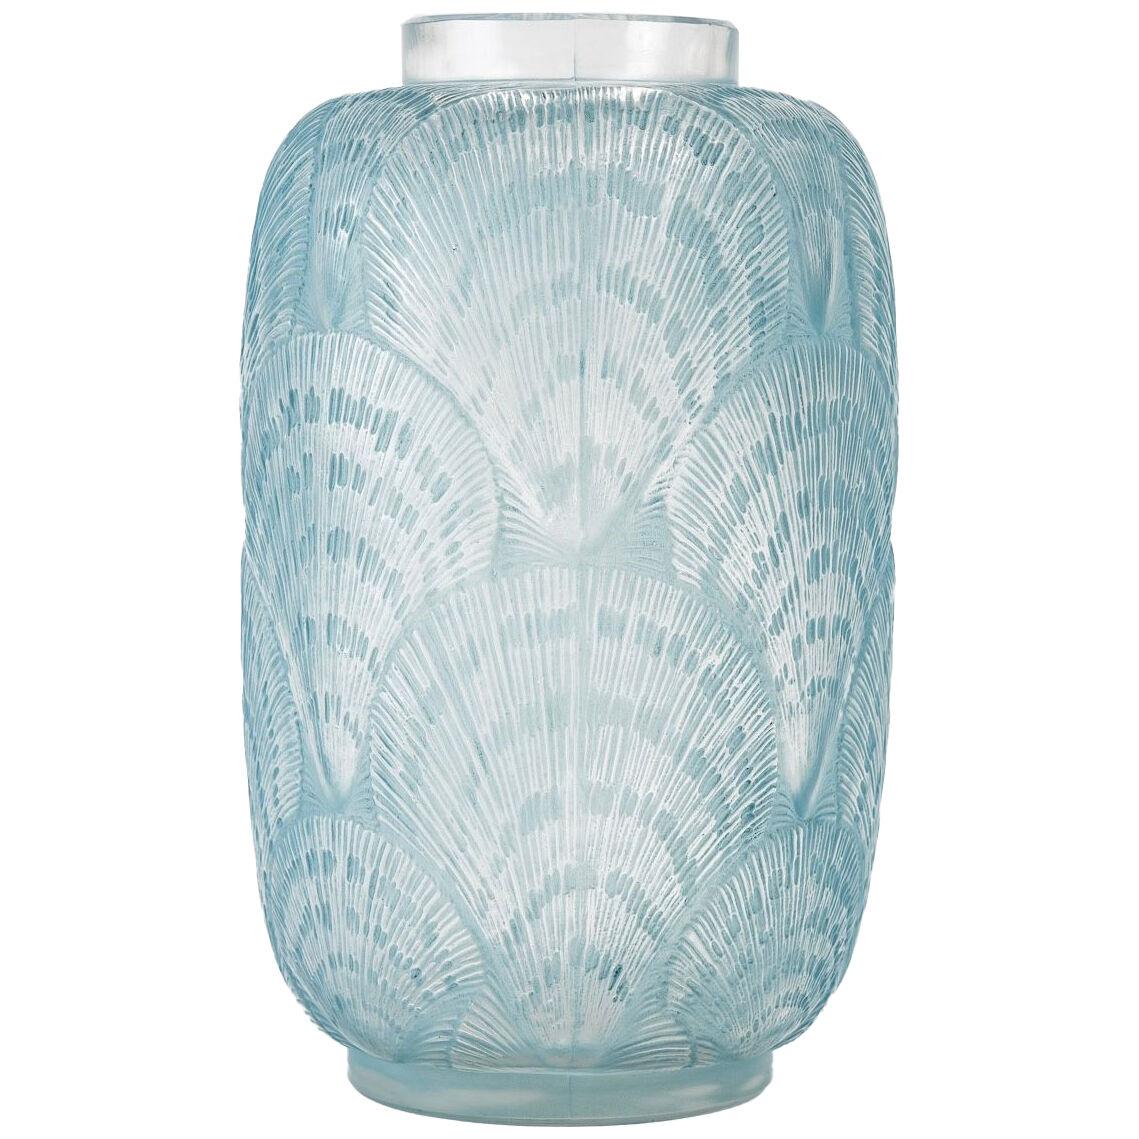 1920 René Lalique - Vase Coquilles Frosted Glass With Blue Patina - Shells